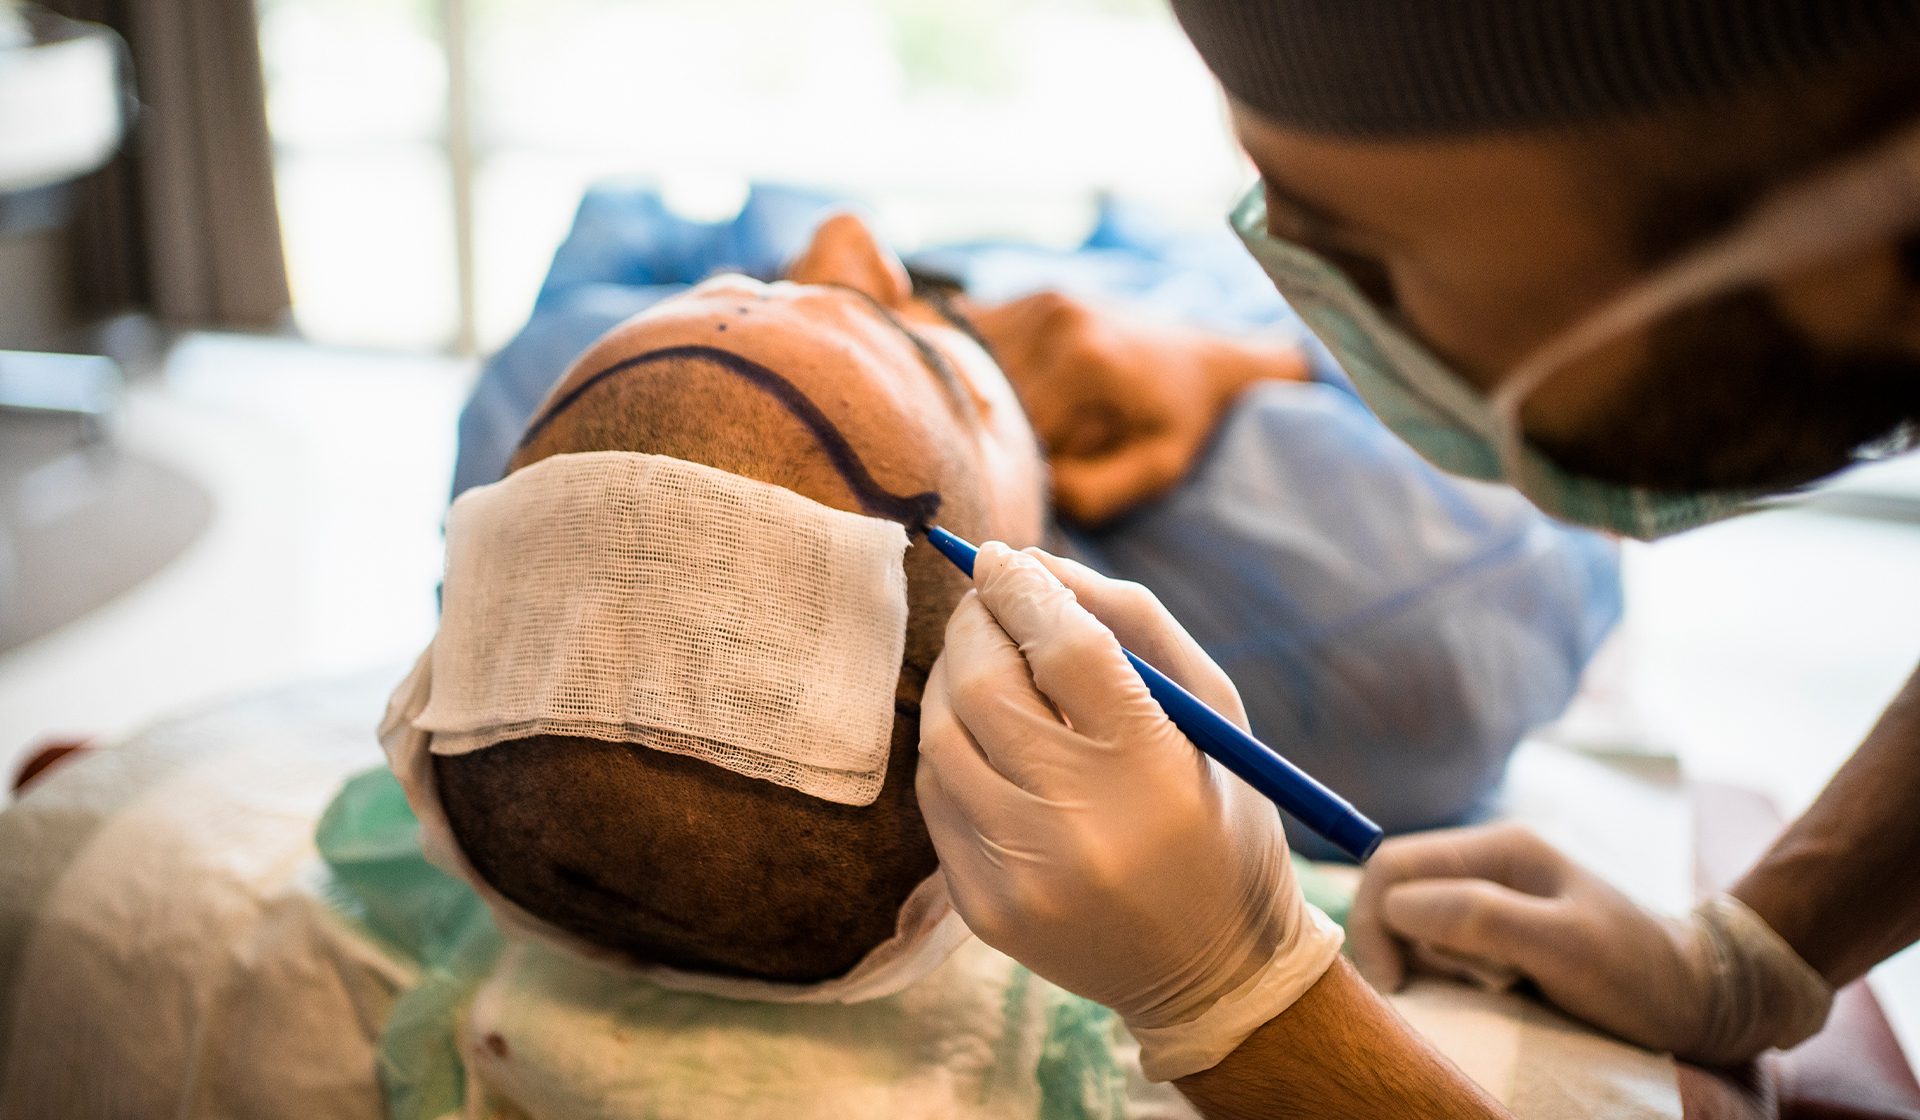 Turkey Hair Transplant: Don't Get One Without Reading This